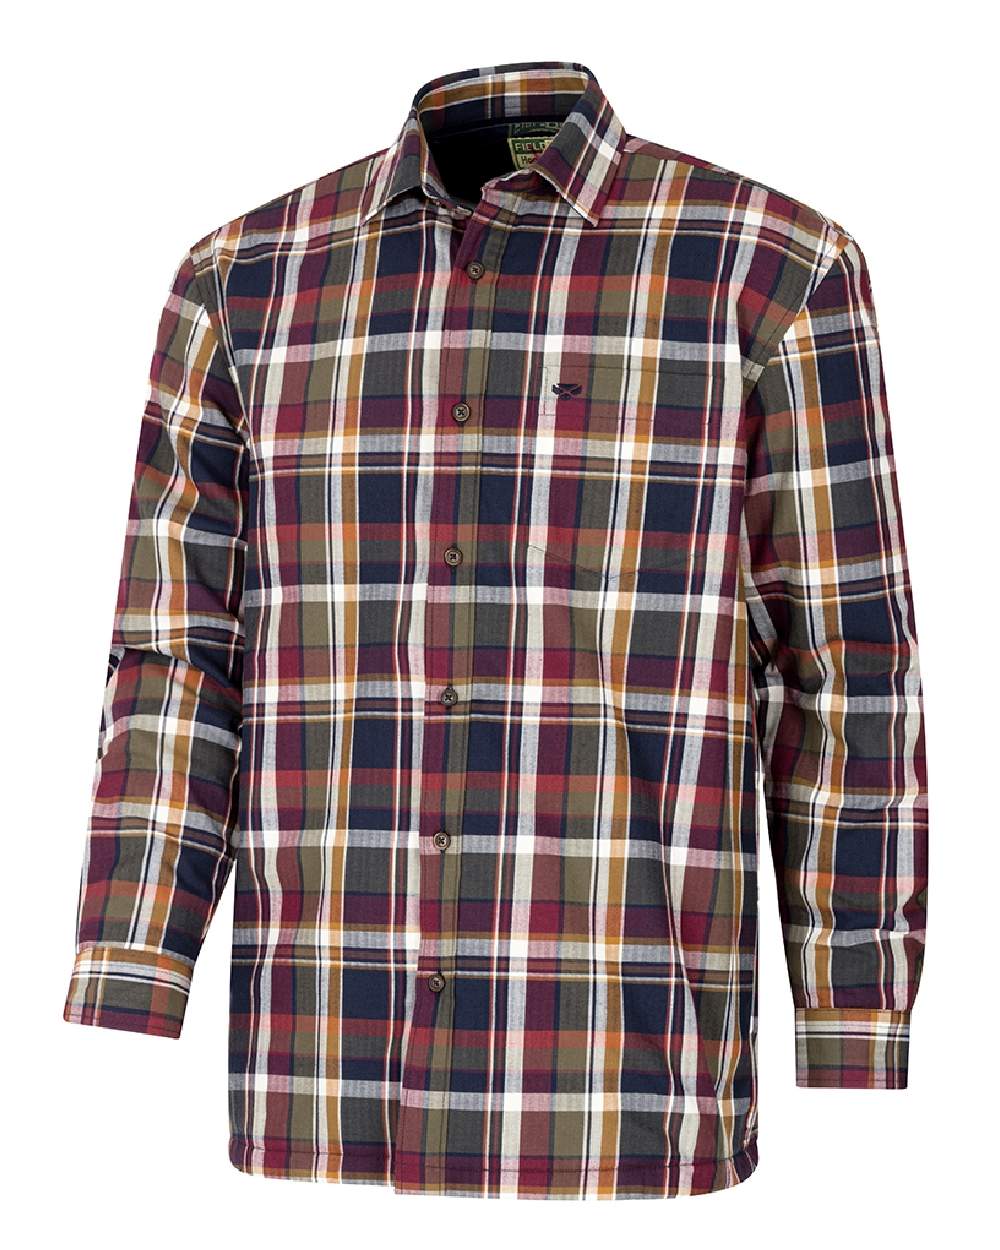 Hoggs of Fife Arran Micro Fleece Lined 100% Cotton Shirt in Wine/Olive Check 